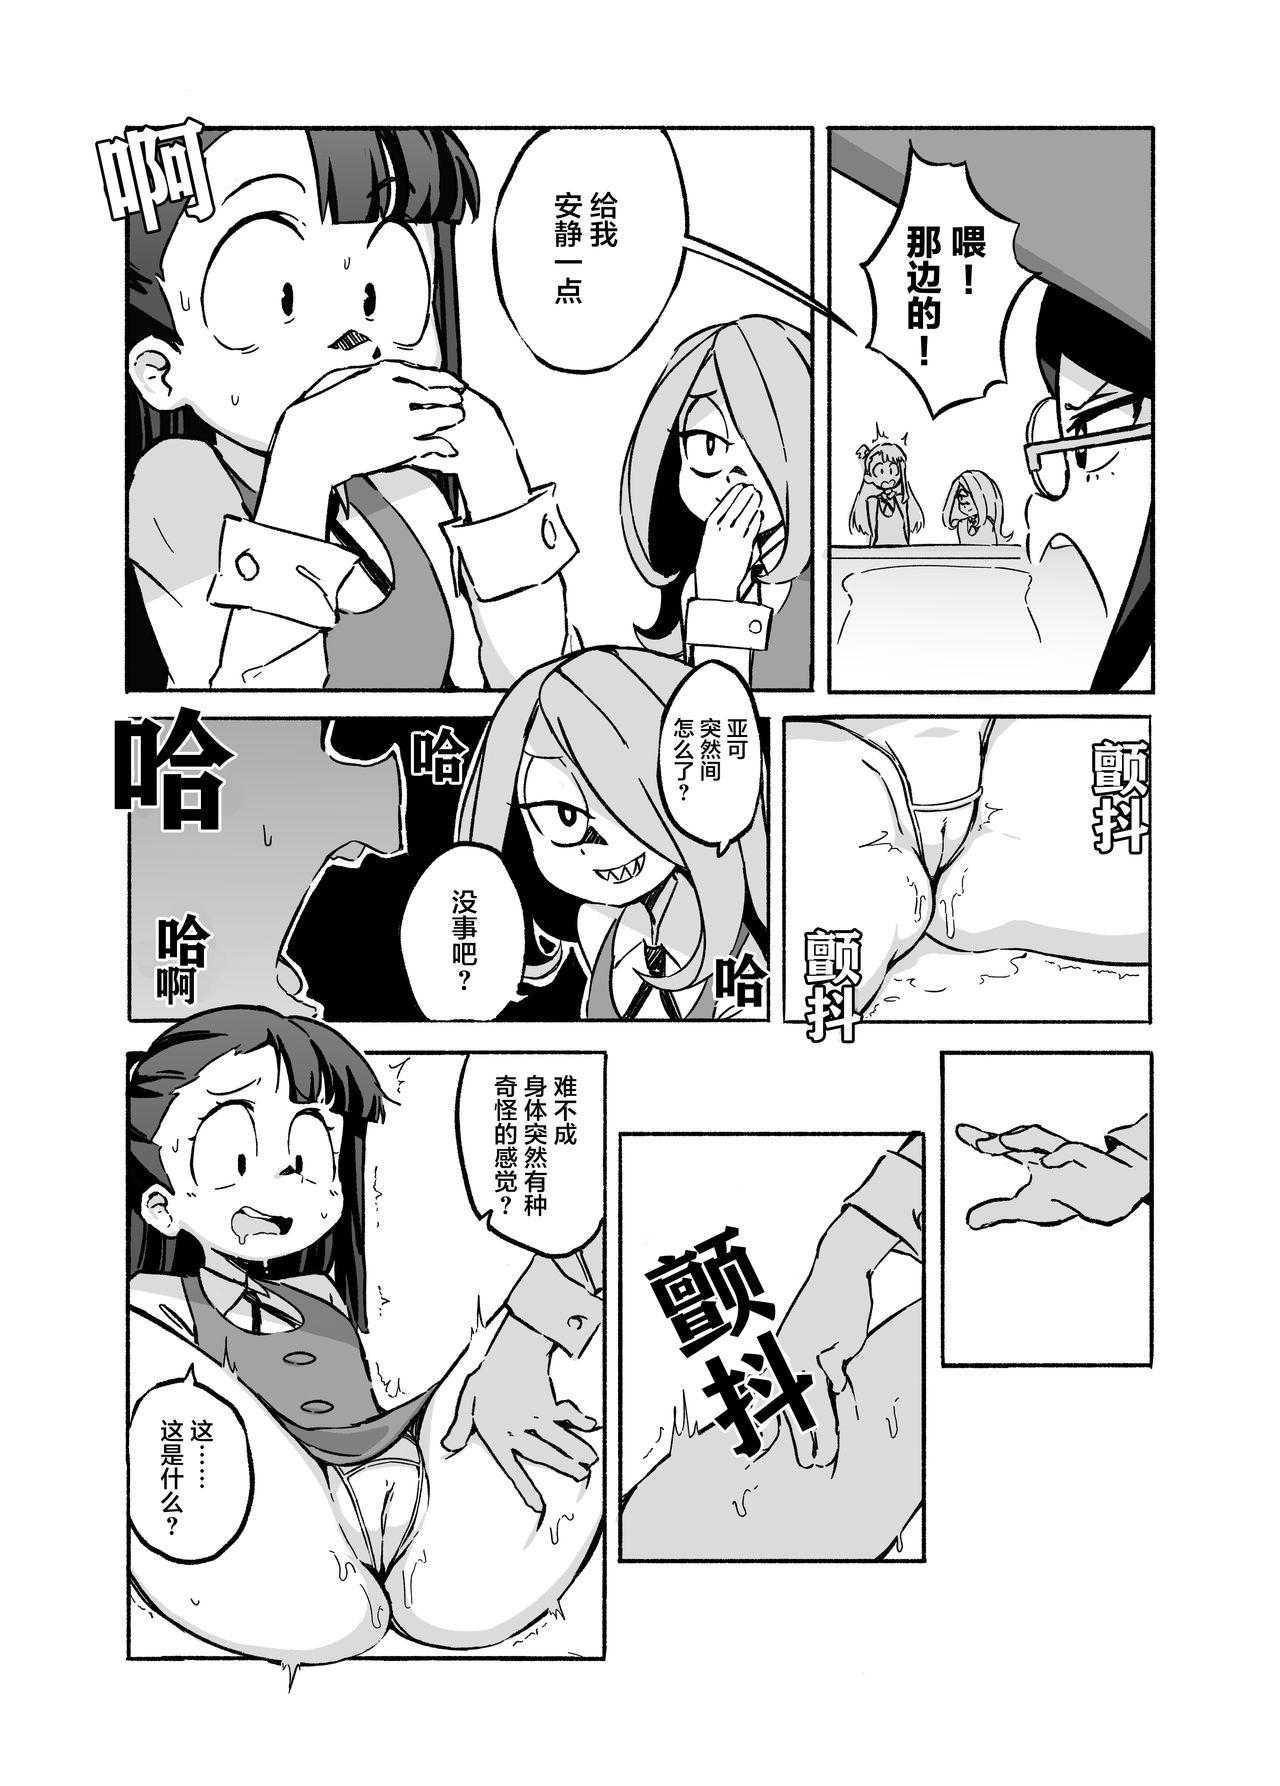 8teenxxx Mushroom Fever - Little witch academia Exhibition - Page 9